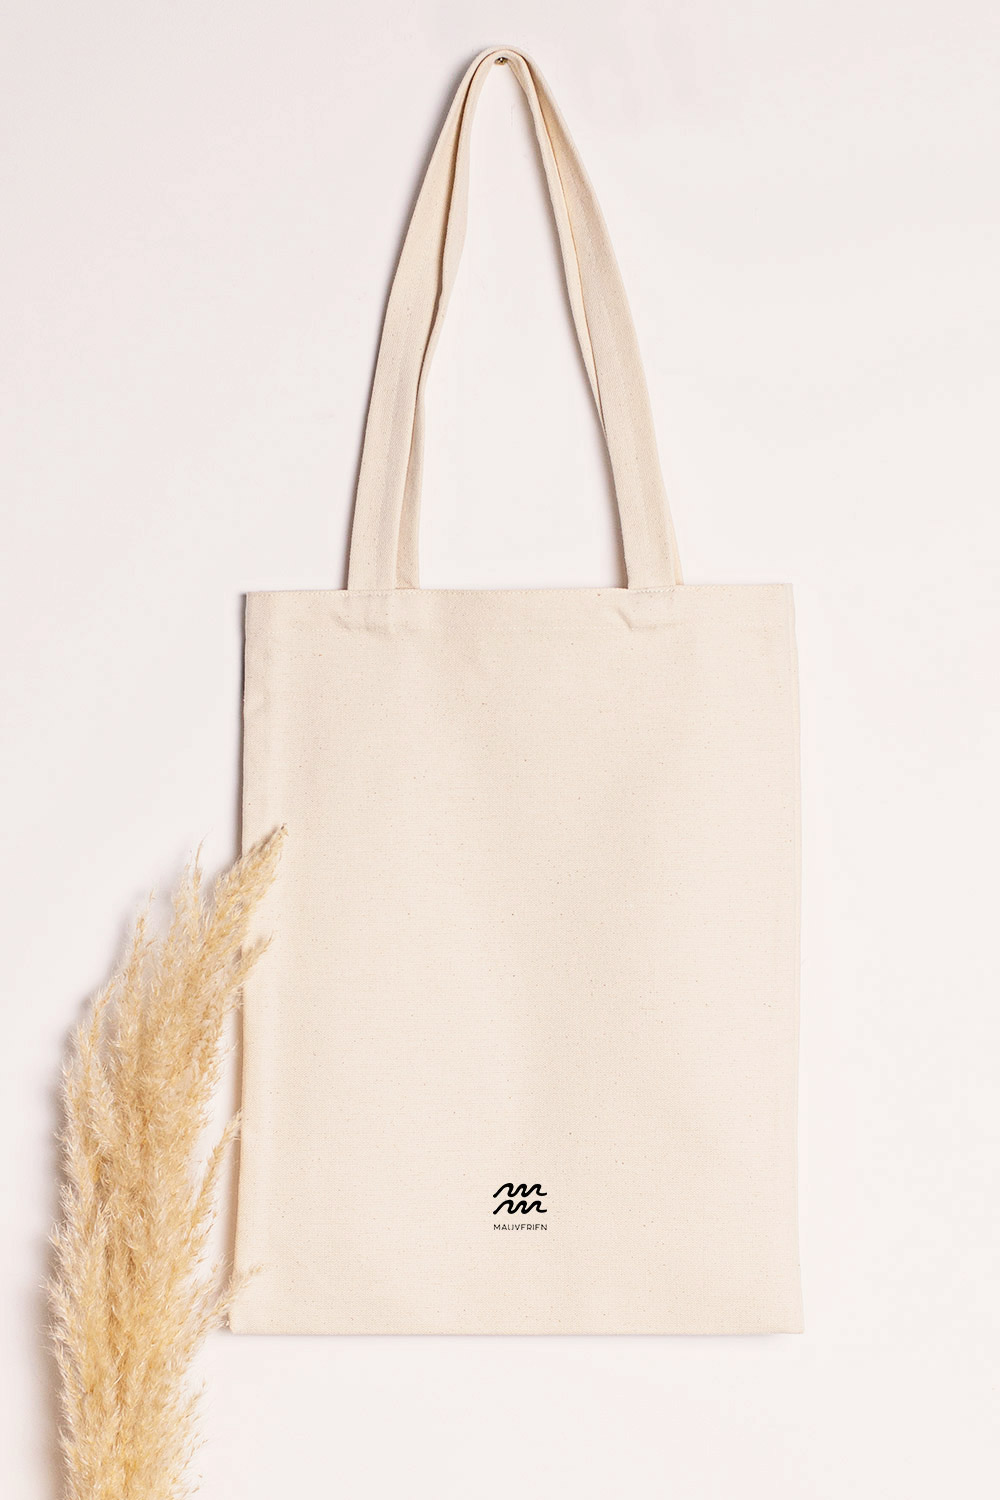 Back view of the tote bag printed with black Mauverien logo.